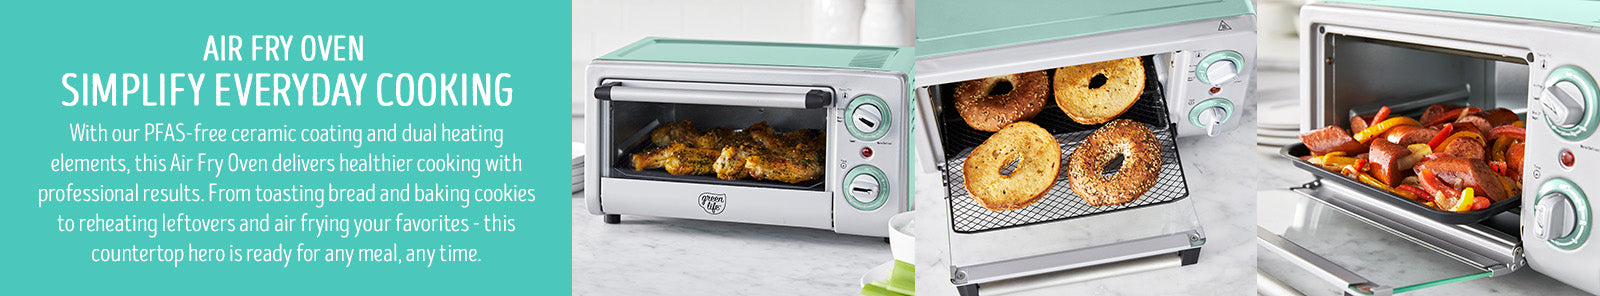 Healthy Non-Toxic Nonstick Cookware - Air Fry Toaster Oven - by GreenLife